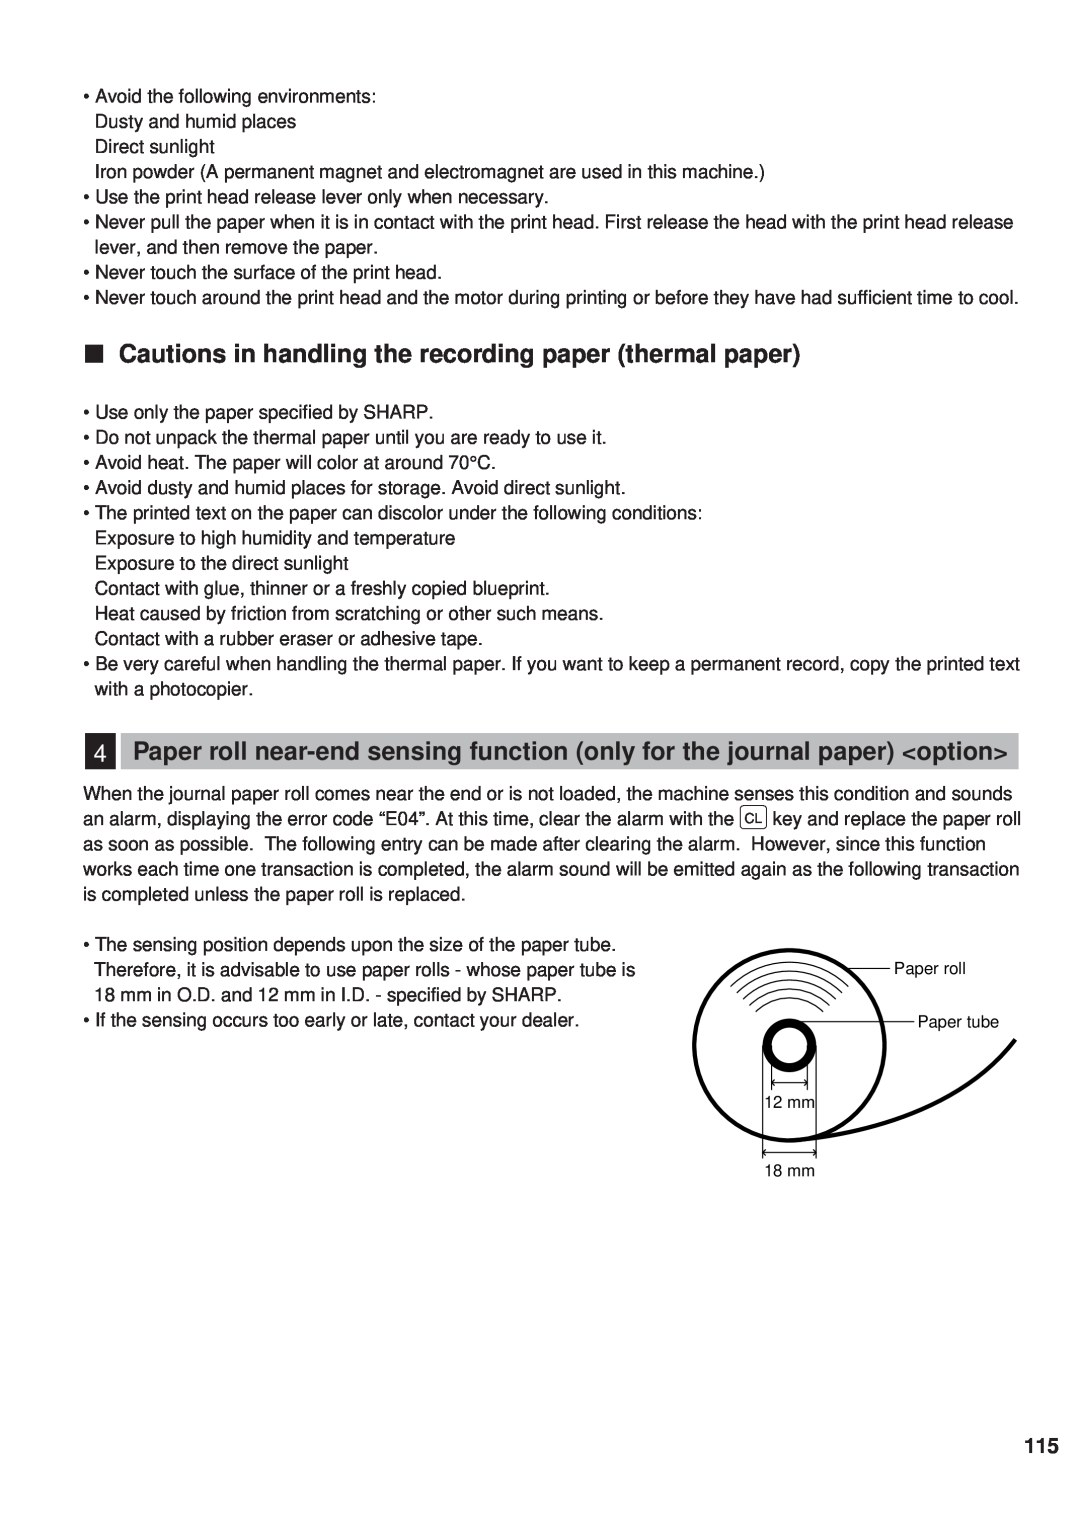 Sharp ER-A450 instruction manual Cautions in handling the recording paper thermal paper 